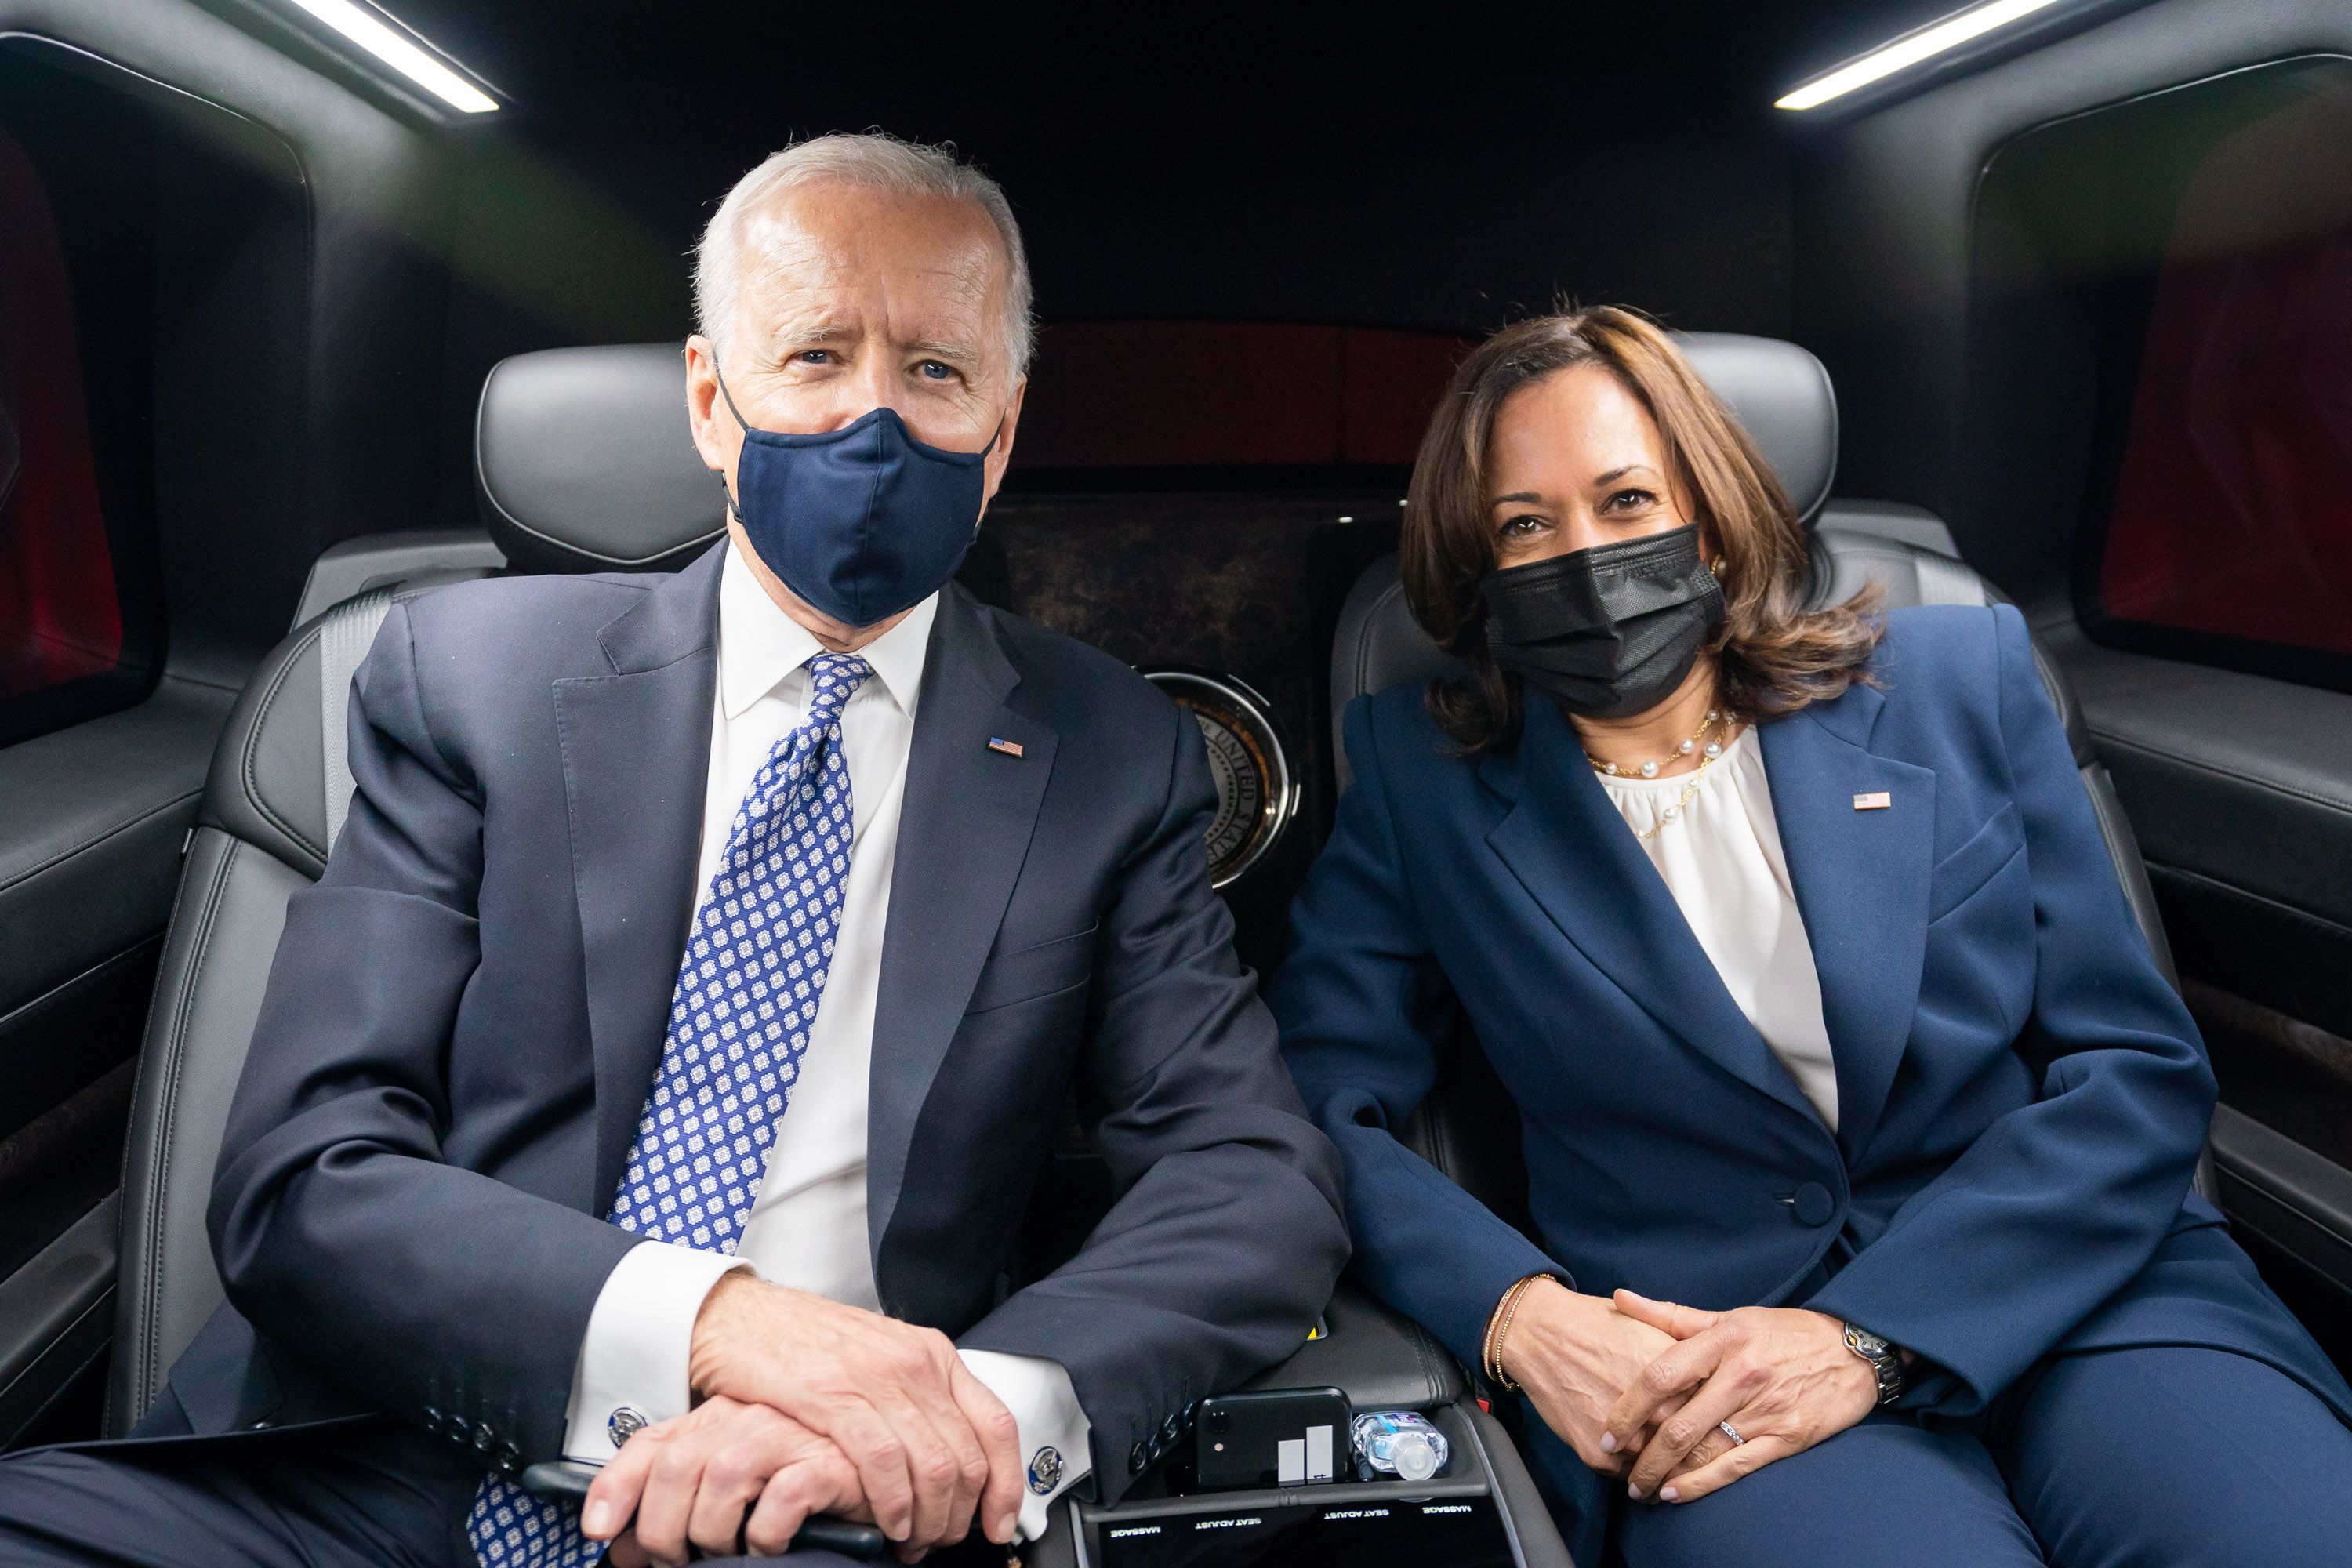 President Biden and Vice President Kamala Harris are seen together inside the presidential limousine.